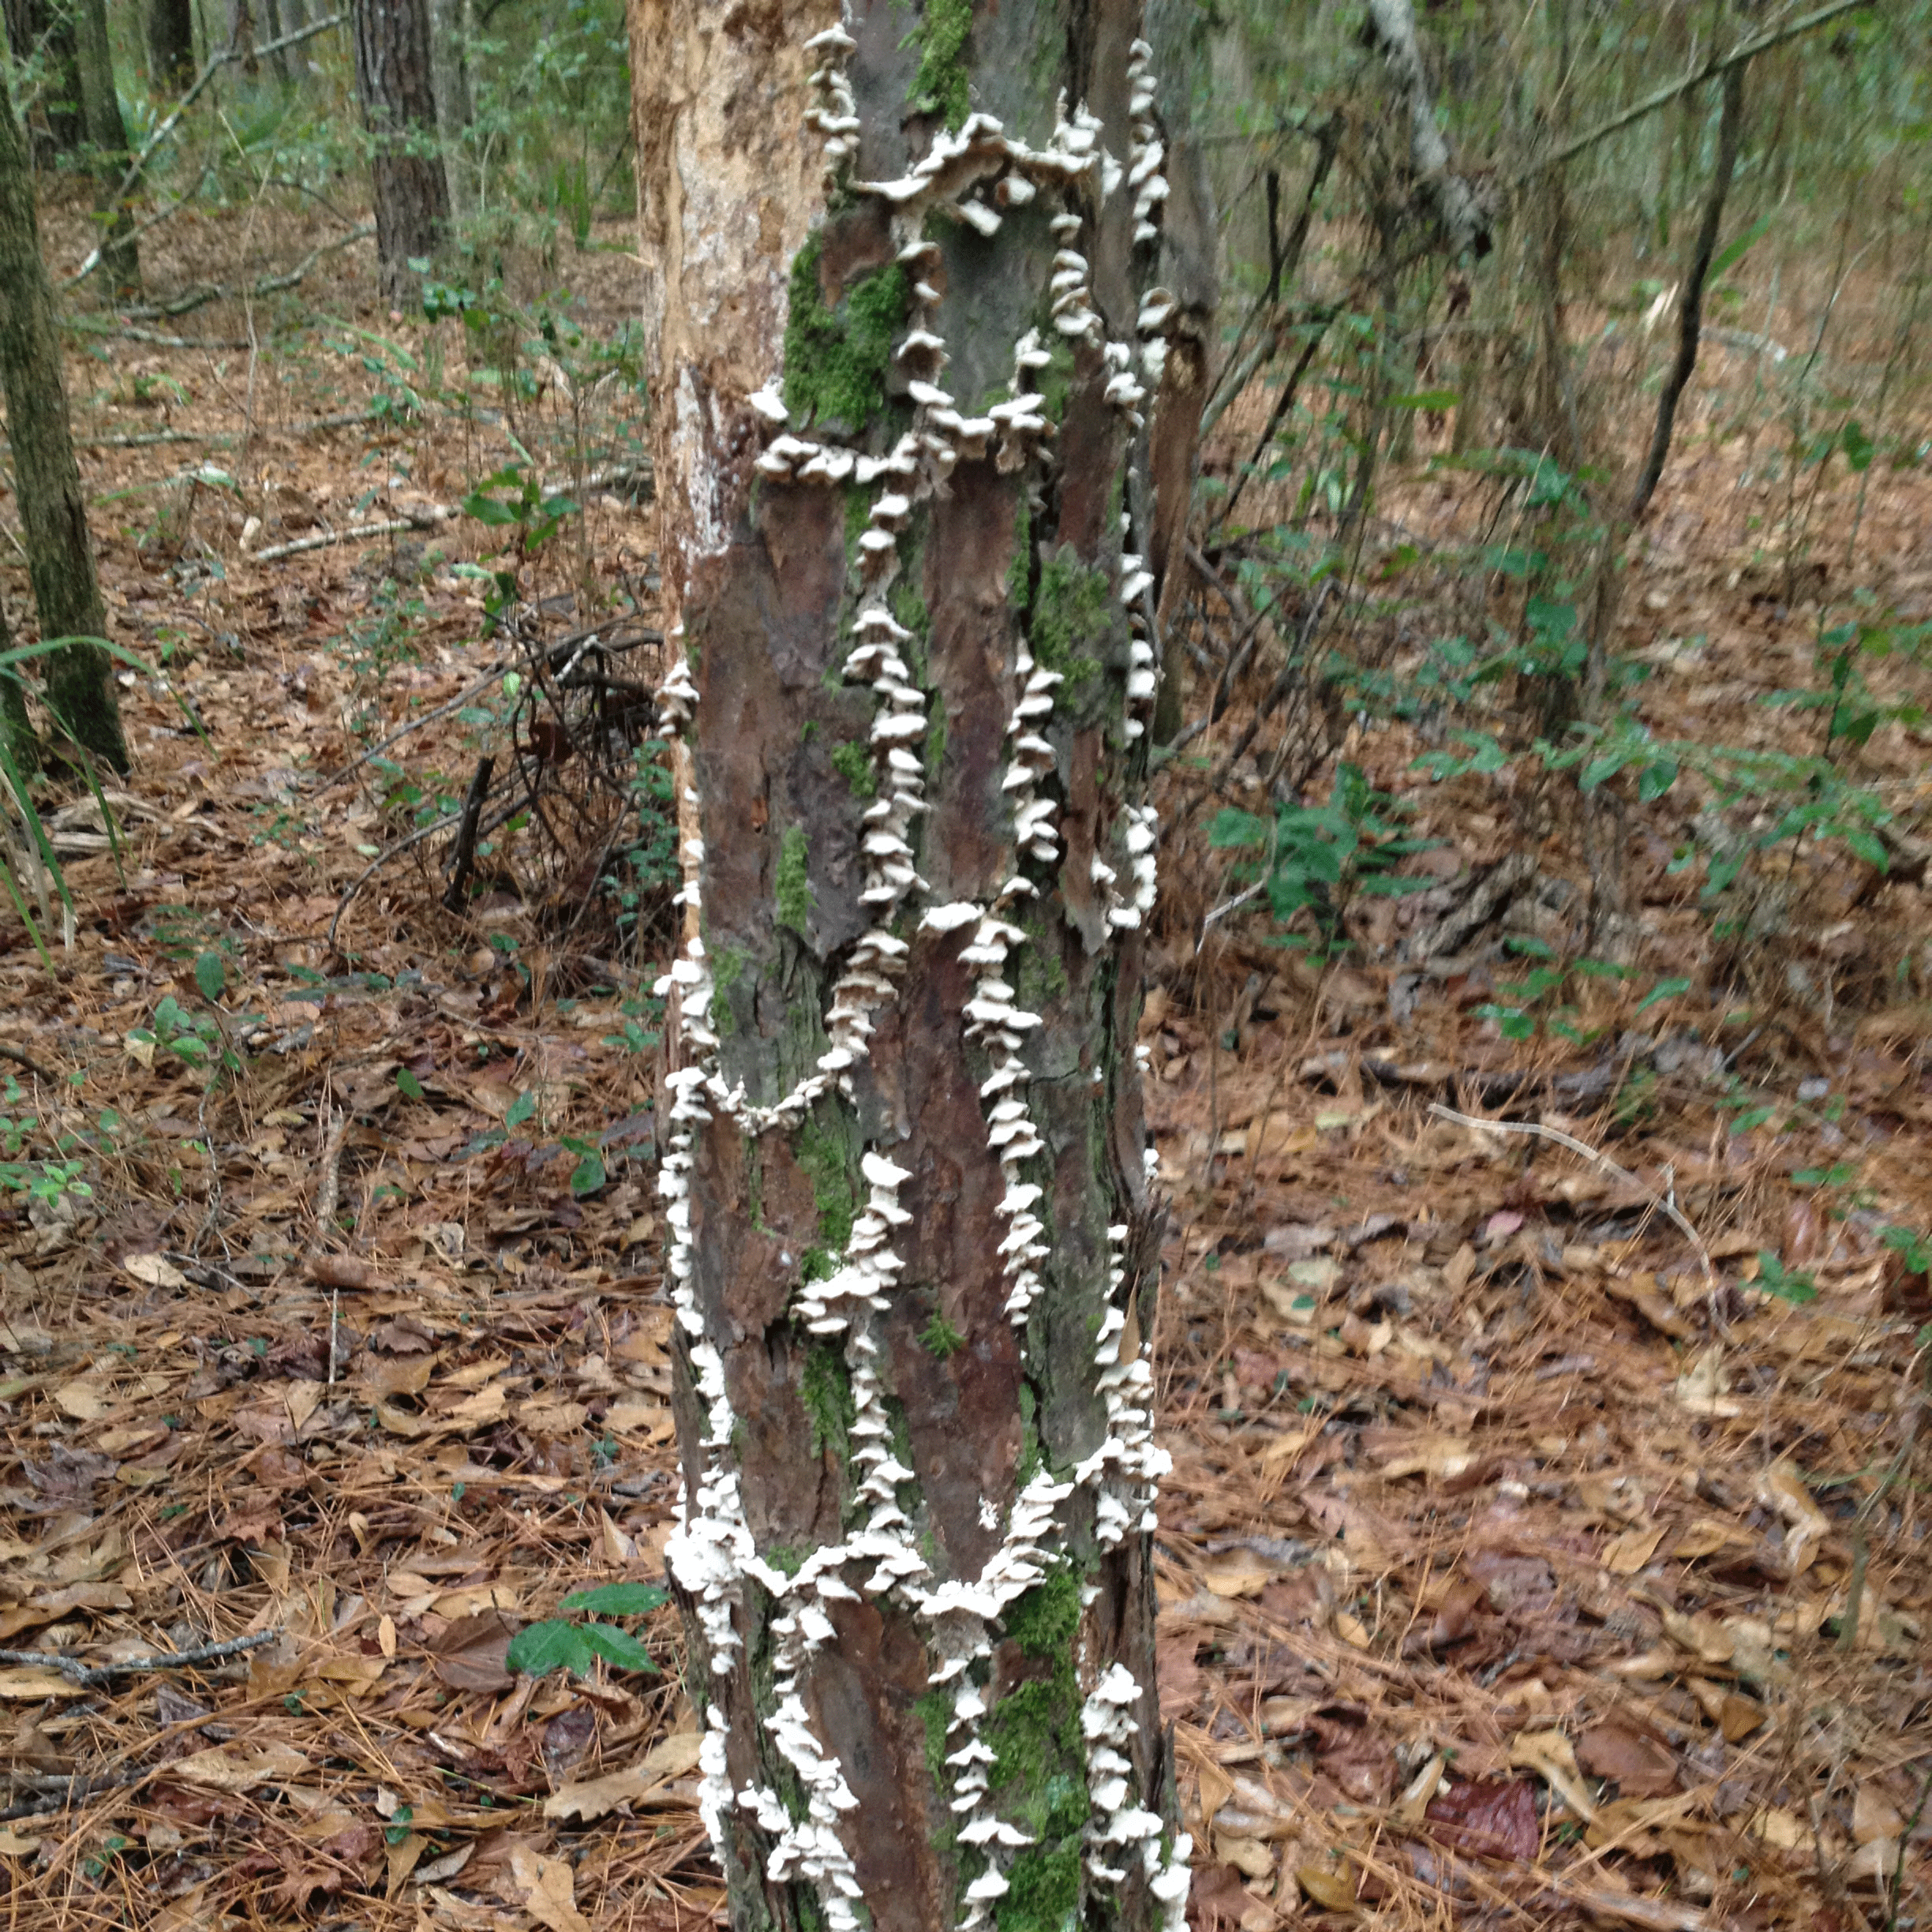 Fungus grows along the breaks in this tree's bark